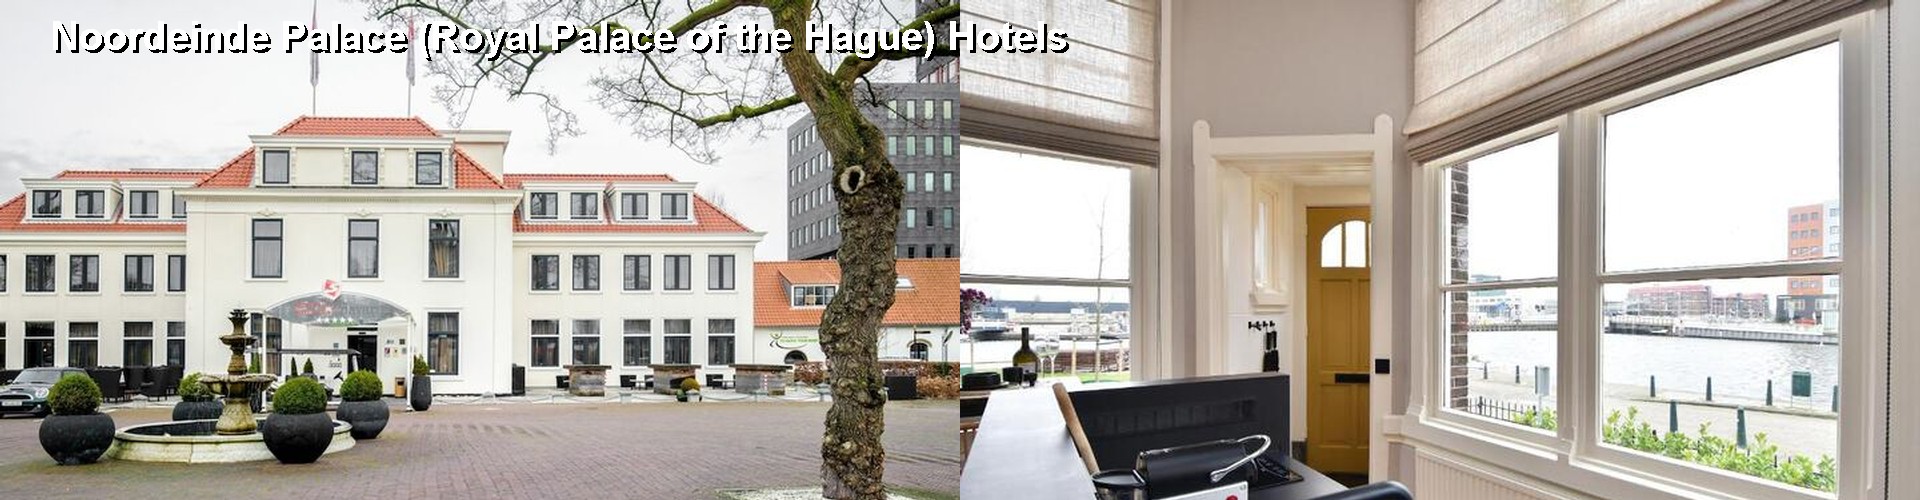 5 Best Hotels near Noordeinde Palace (Royal Palace of the Hague)